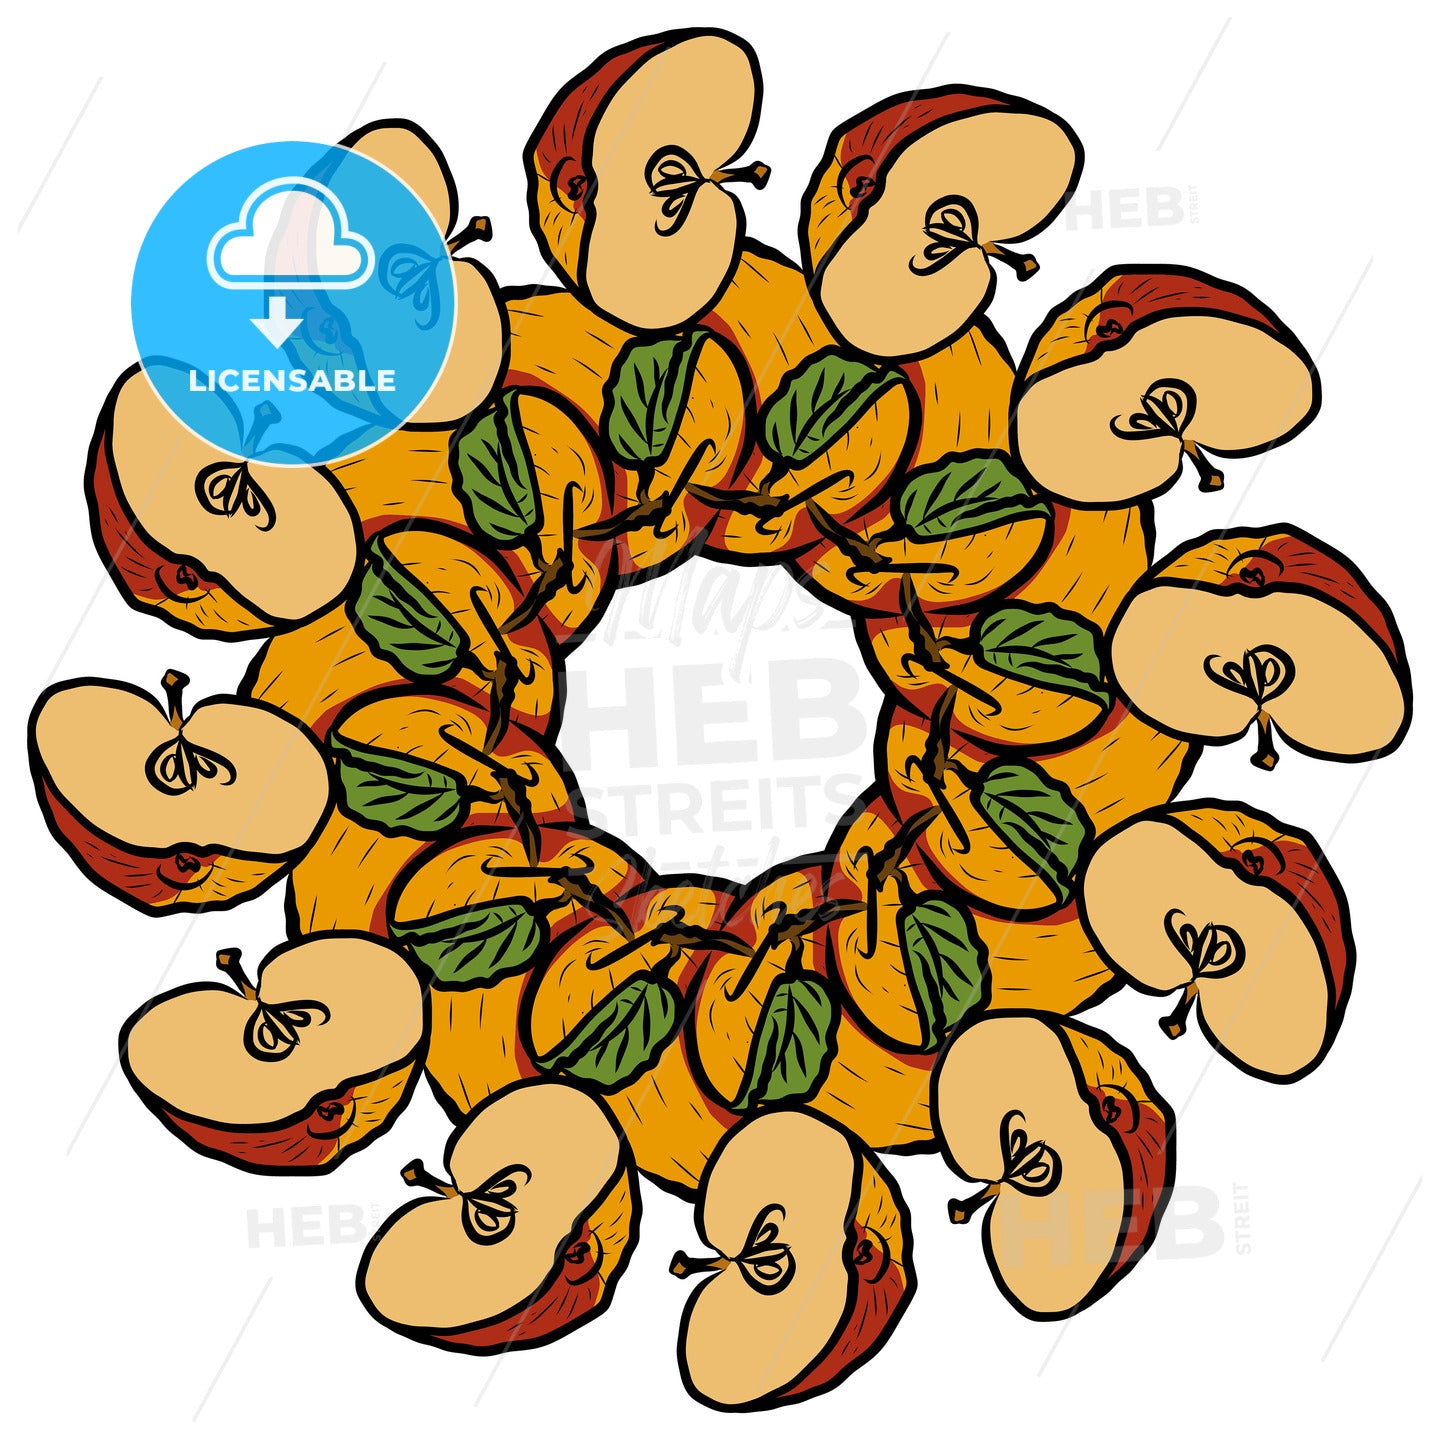 Many apples arranged in a circle on white – instant download